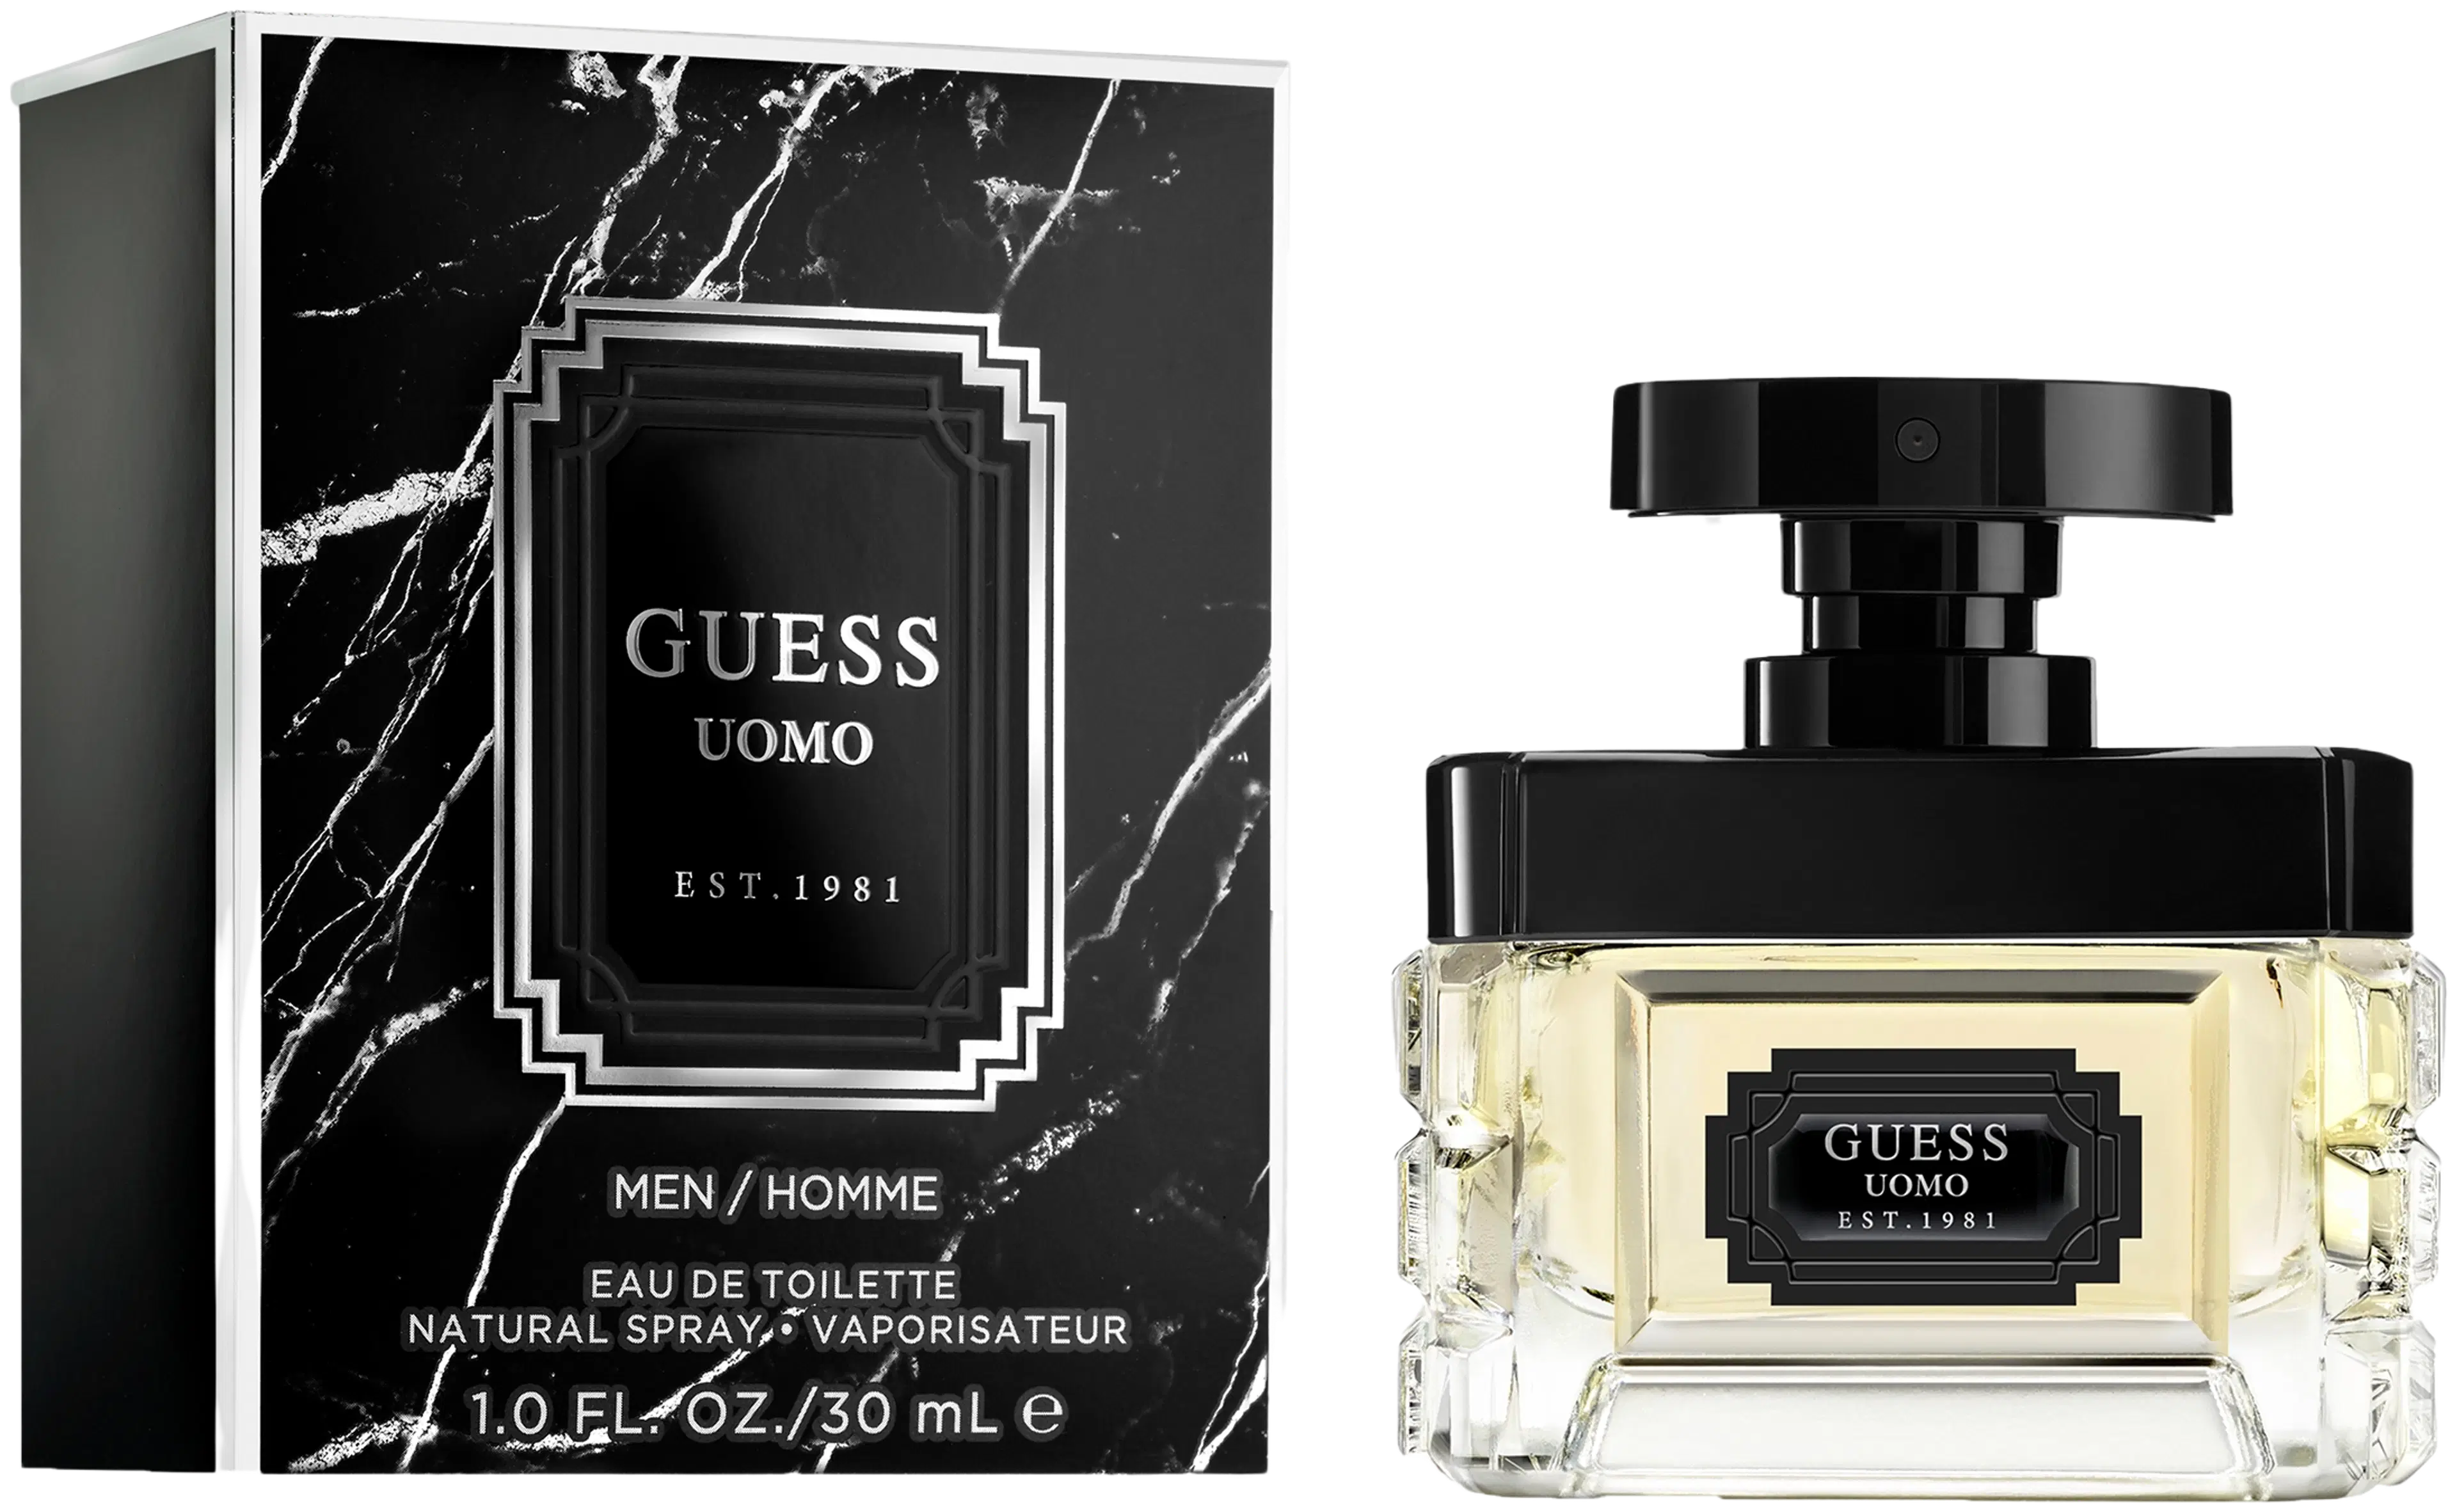 GUESS Uomo EdT 30ml